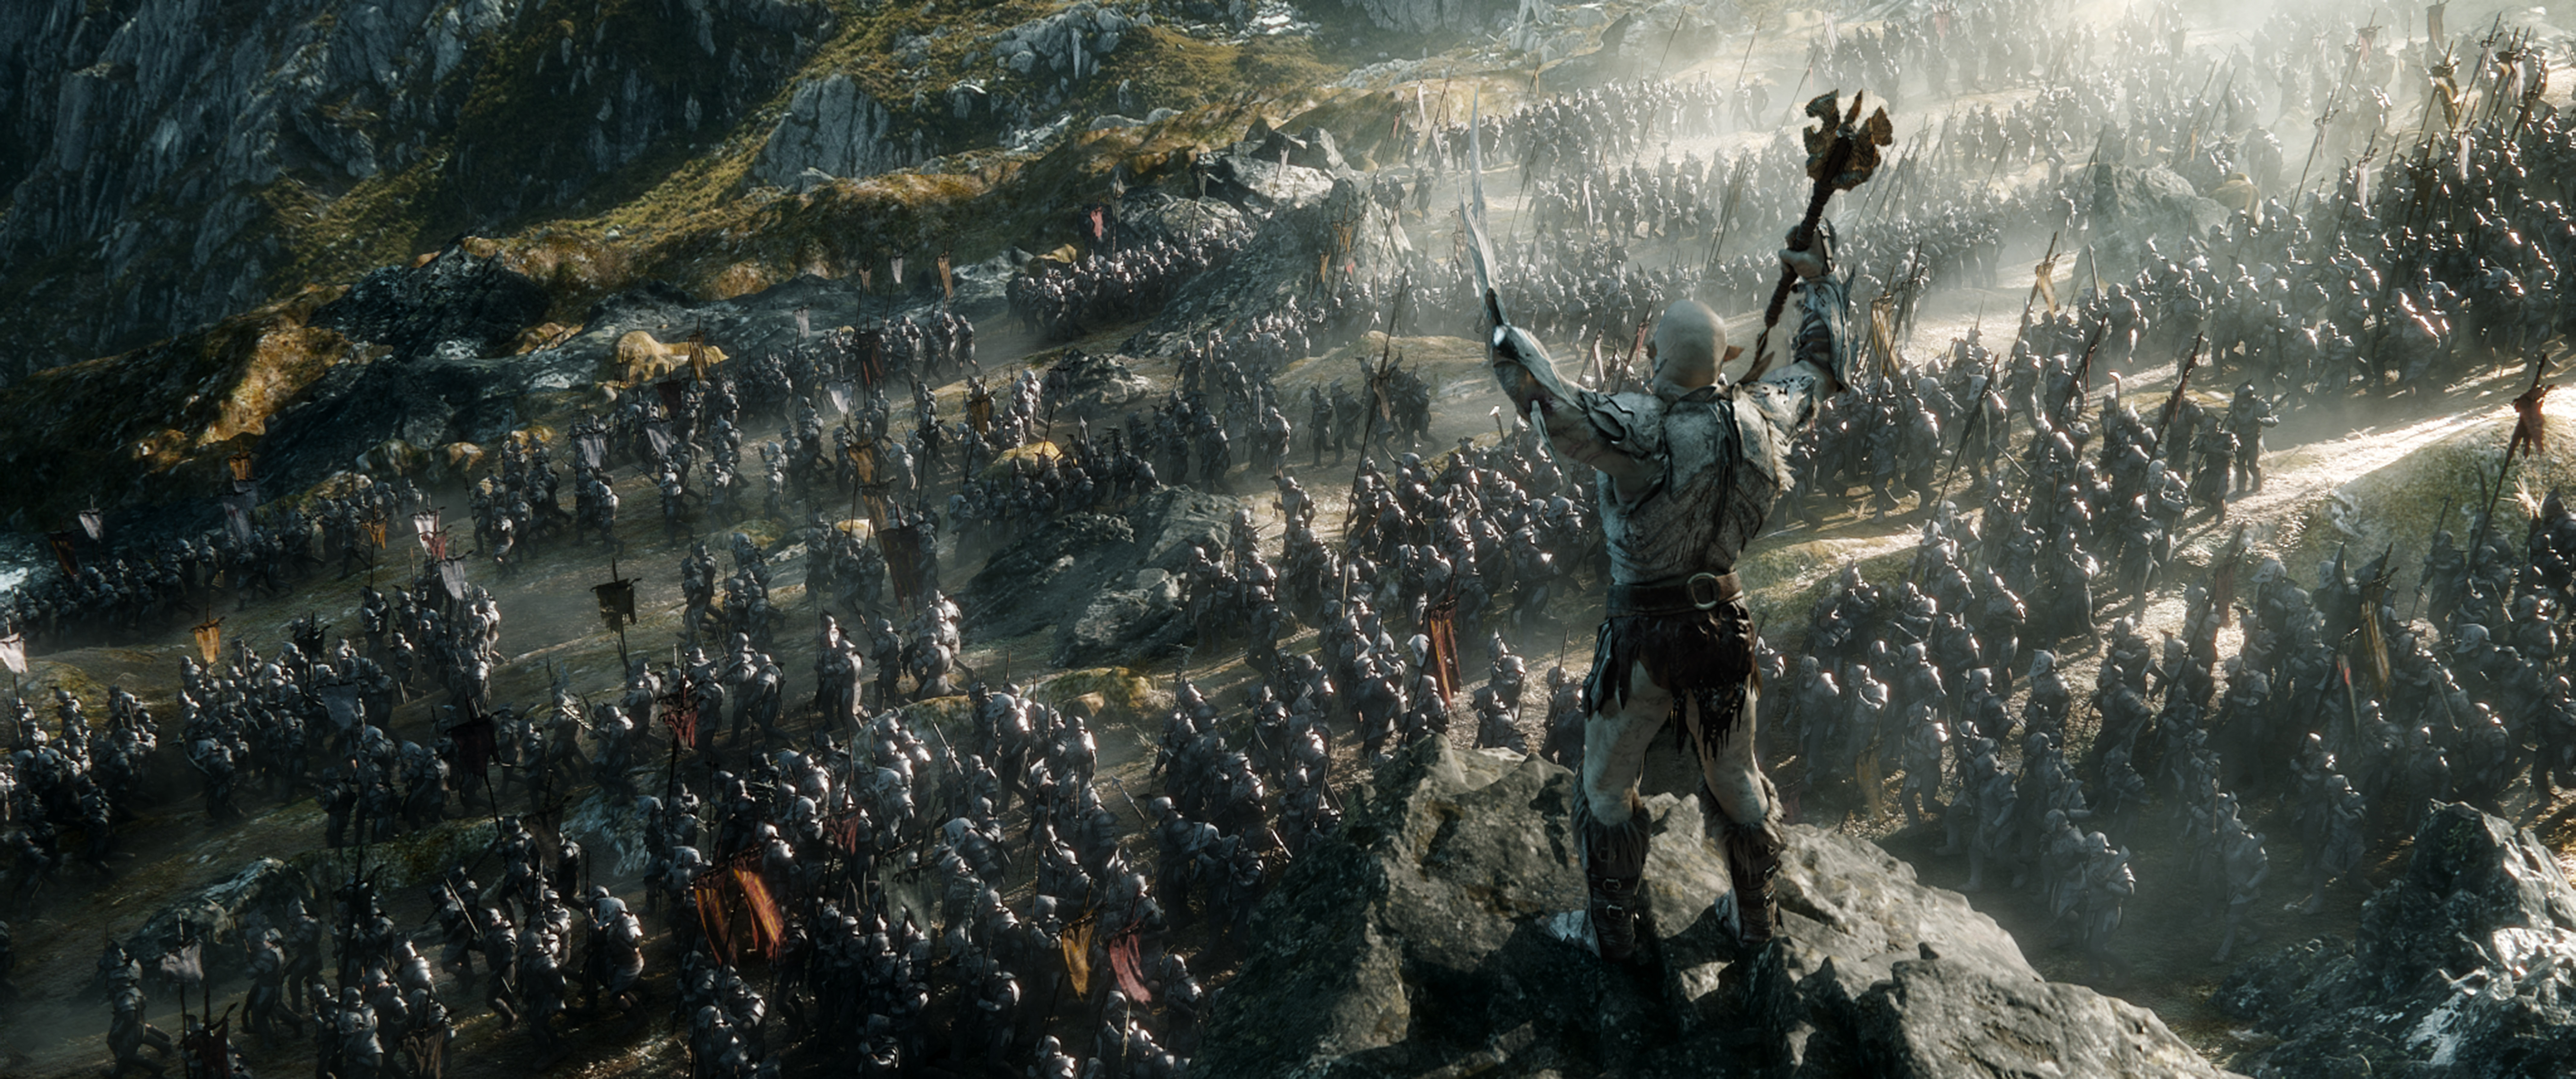 High Resolution Wallpaper | The Hobbit: The Battle Of The Five Armies 8533x3575 px